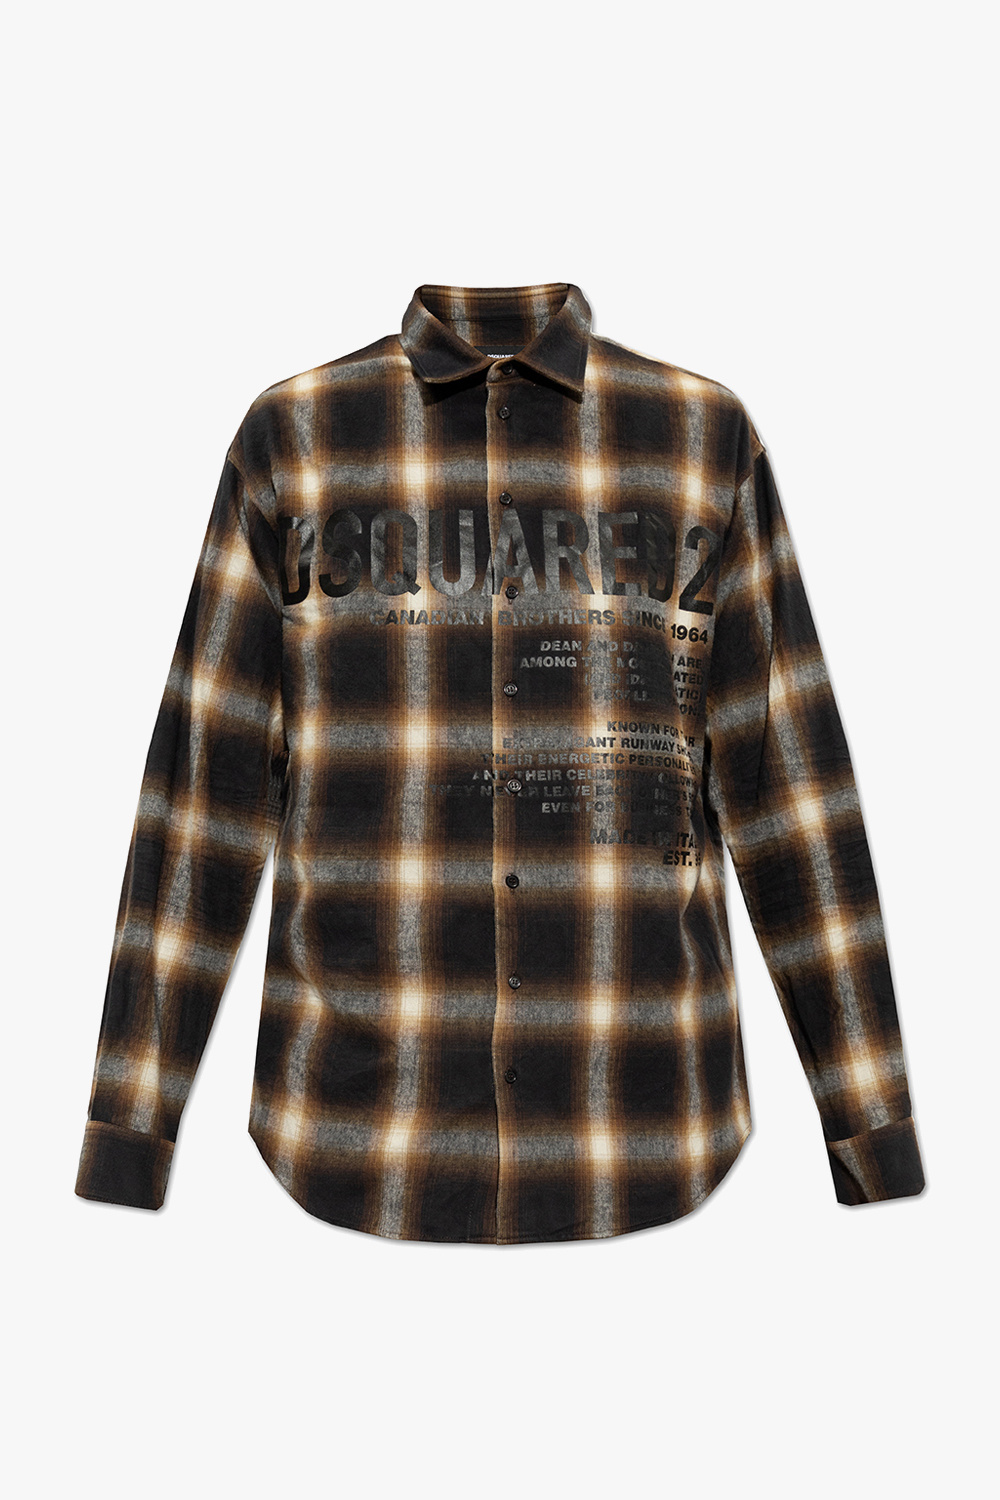 Dsquared2 shirt luxurious with logo